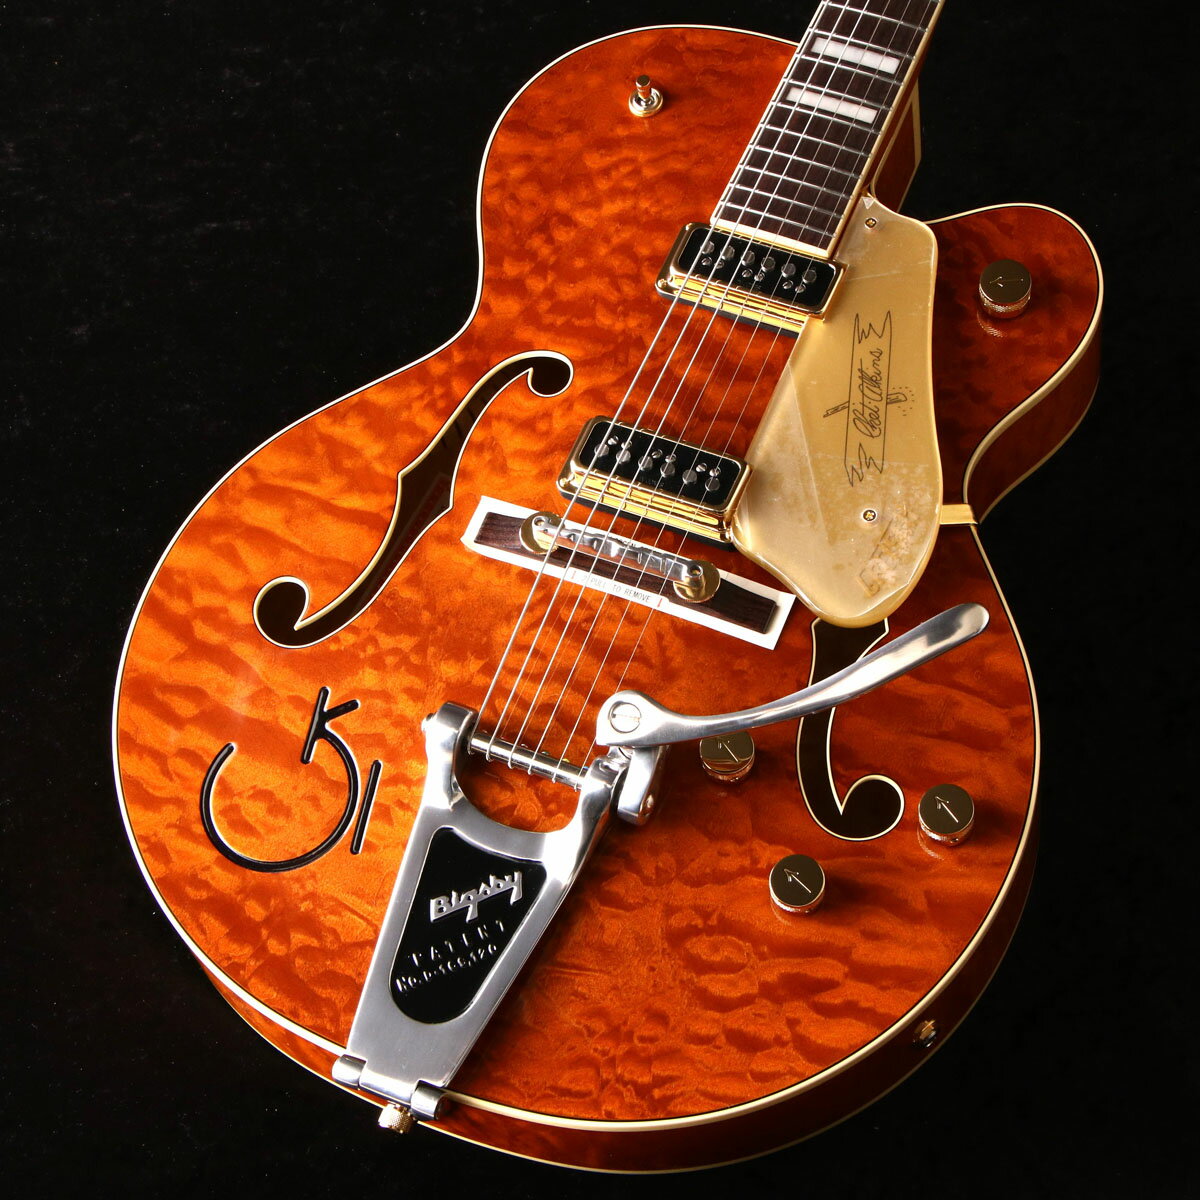 Gretsch / G6120TGQM-56 Limited Edition Quilt Classic Chet Atkins Hollow Body with Bigsby Roundup Orange Stain Lacquer【S/N JT24041309】